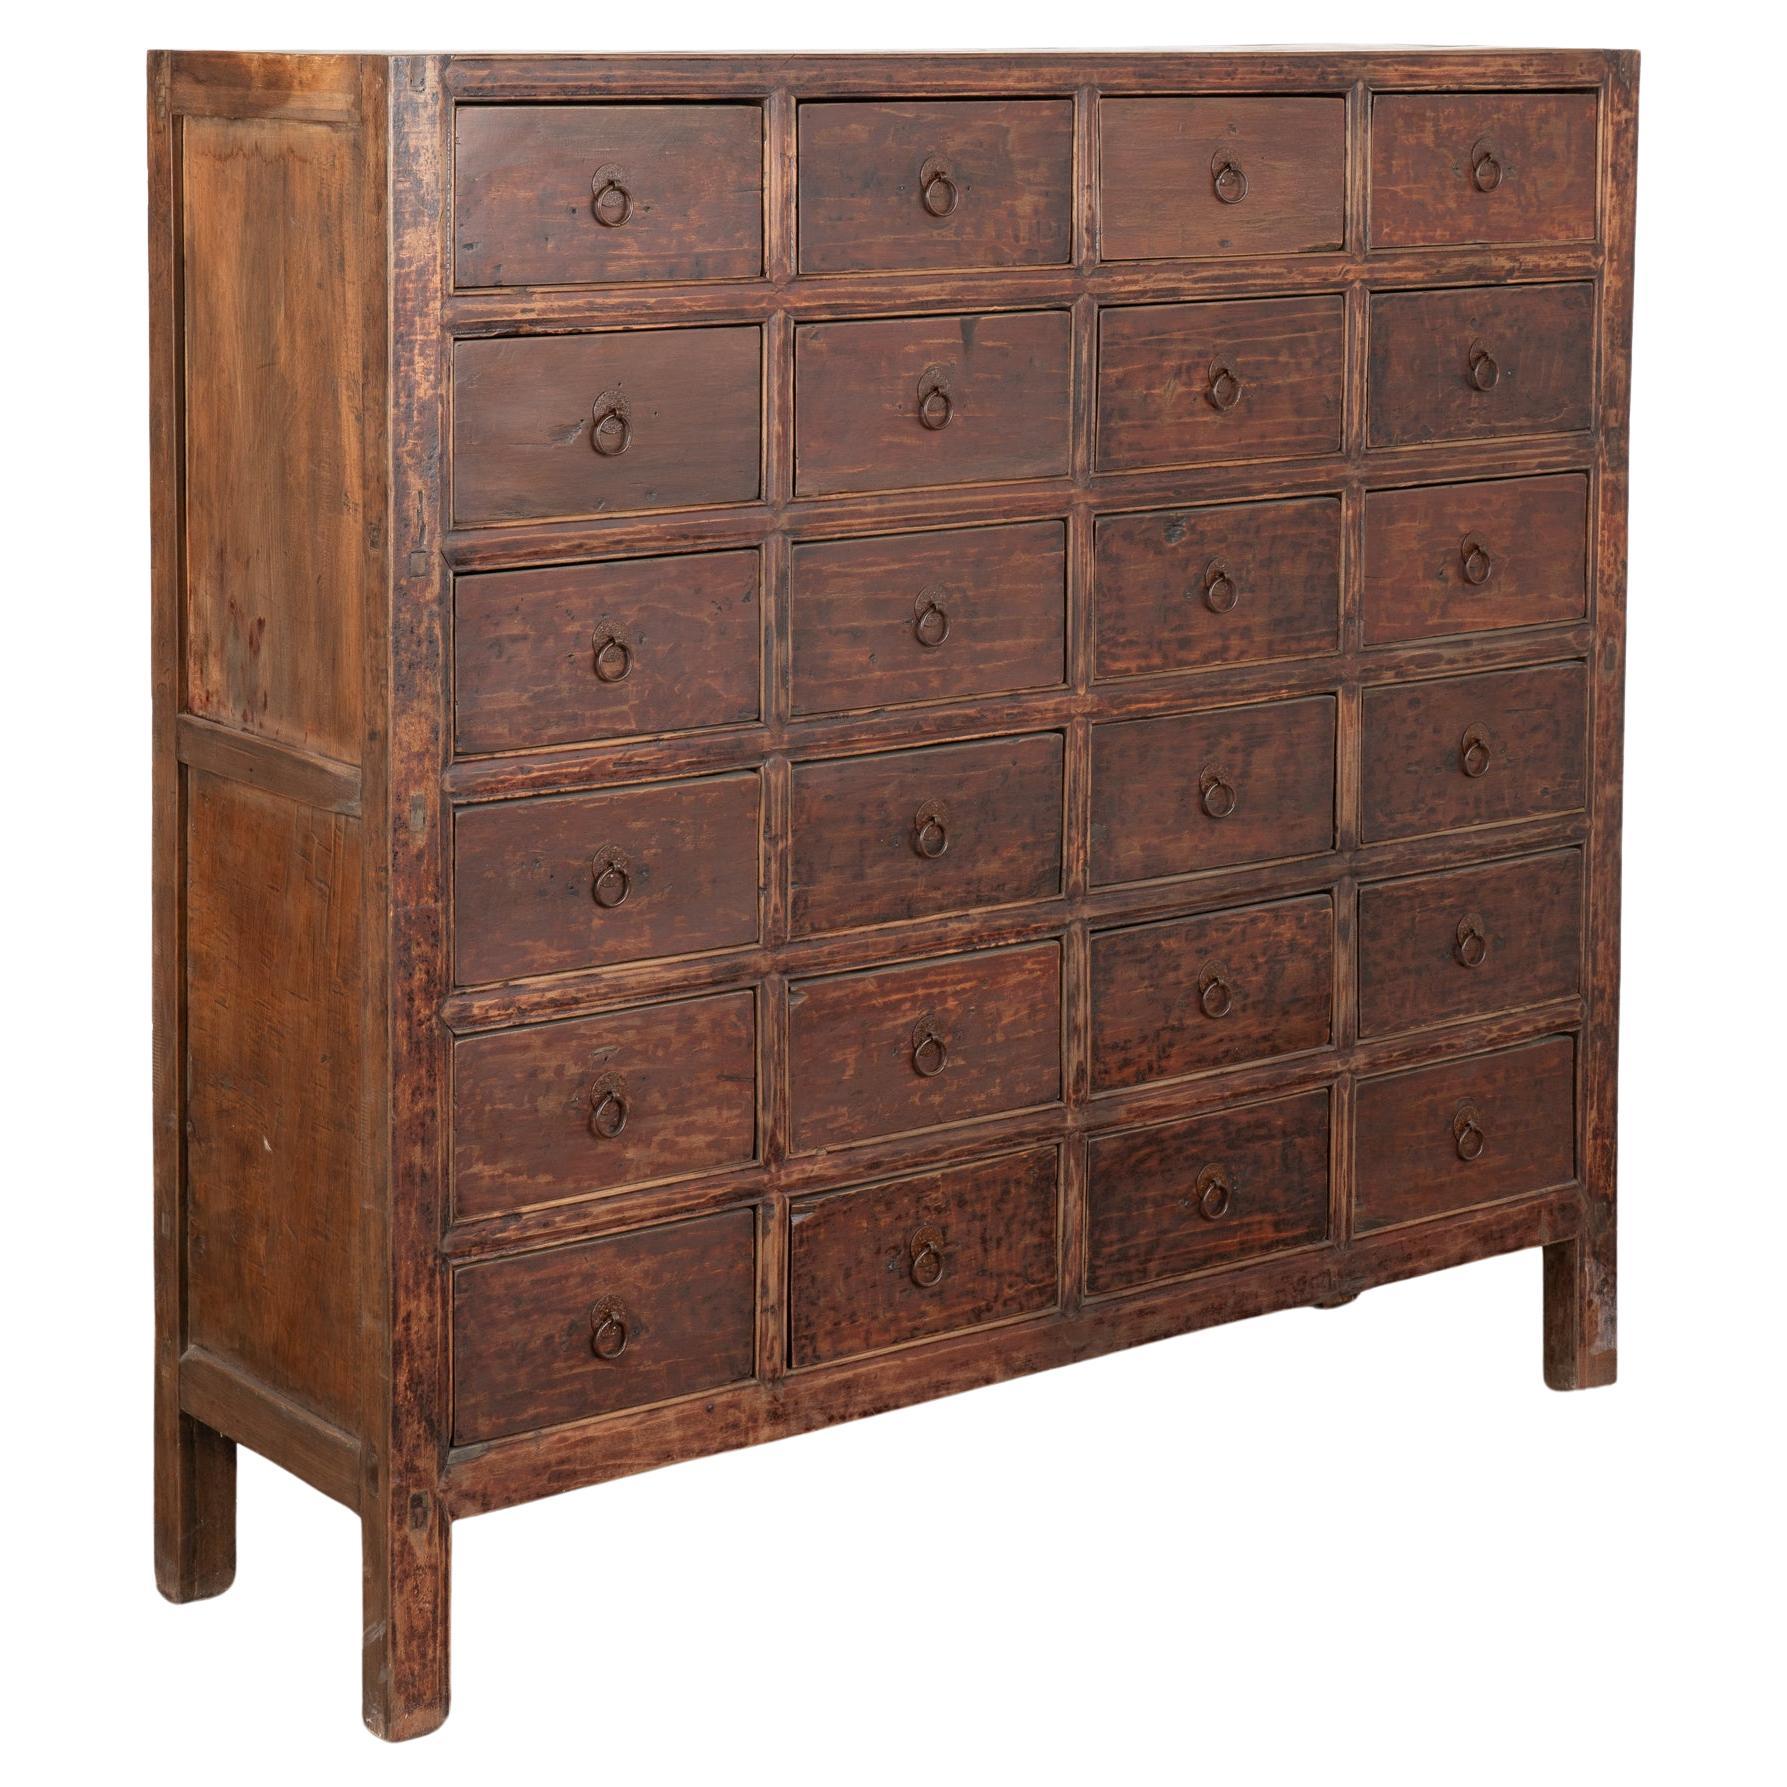 Chinese Apothecary Chest of 24 Drawers, circa 1820-40 For Sale